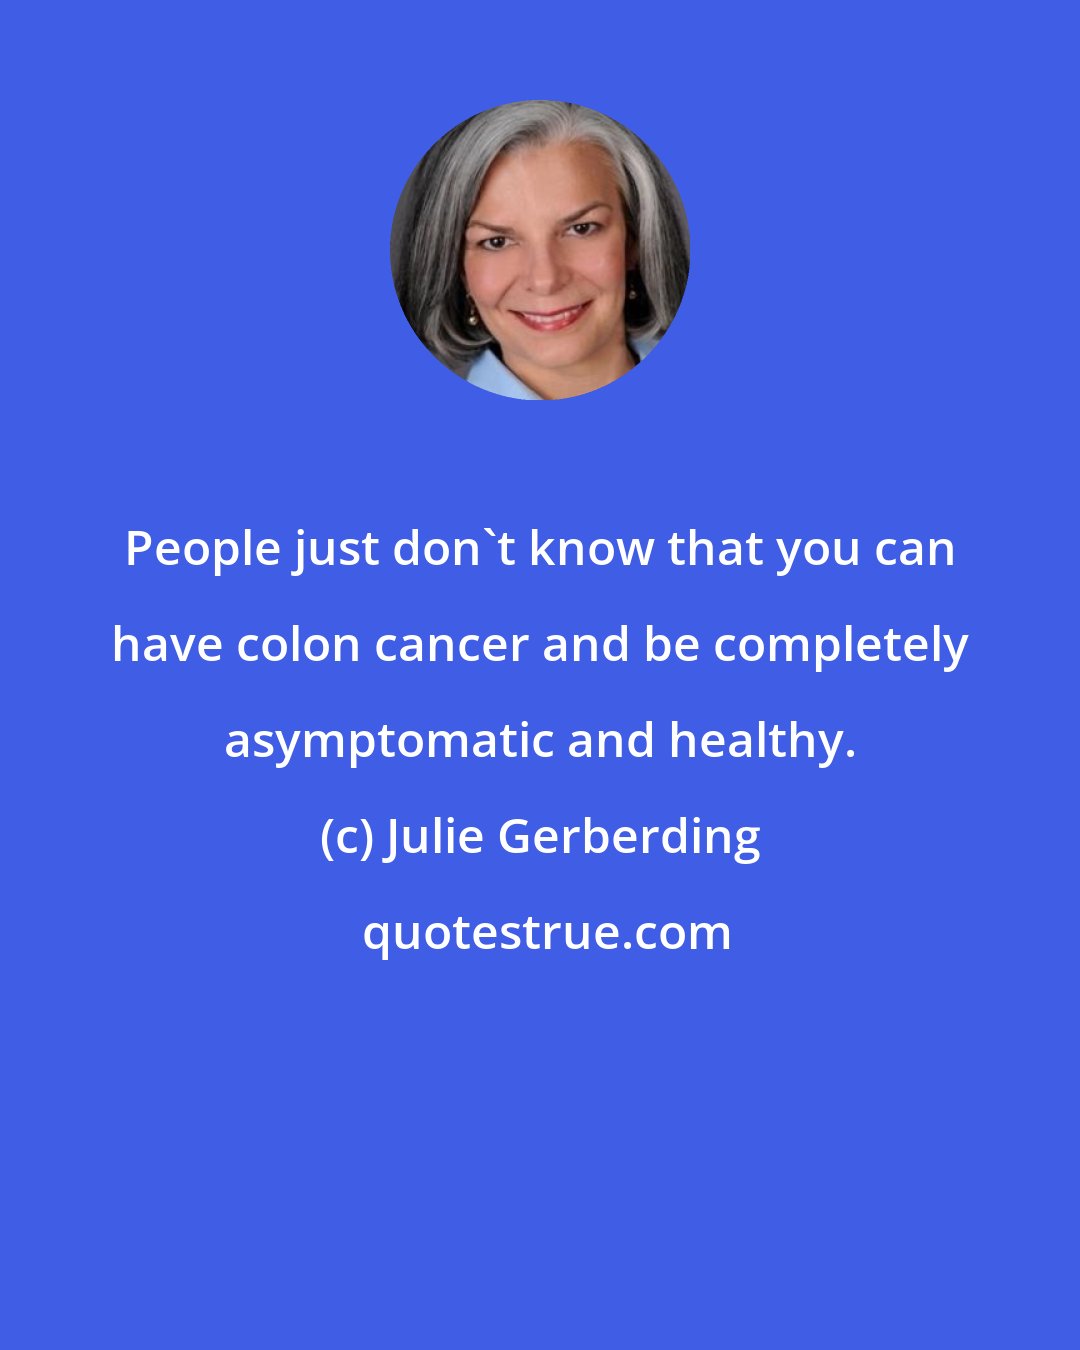 Julie Gerberding: People just don't know that you can have colon cancer and be completely asymptomatic and healthy.